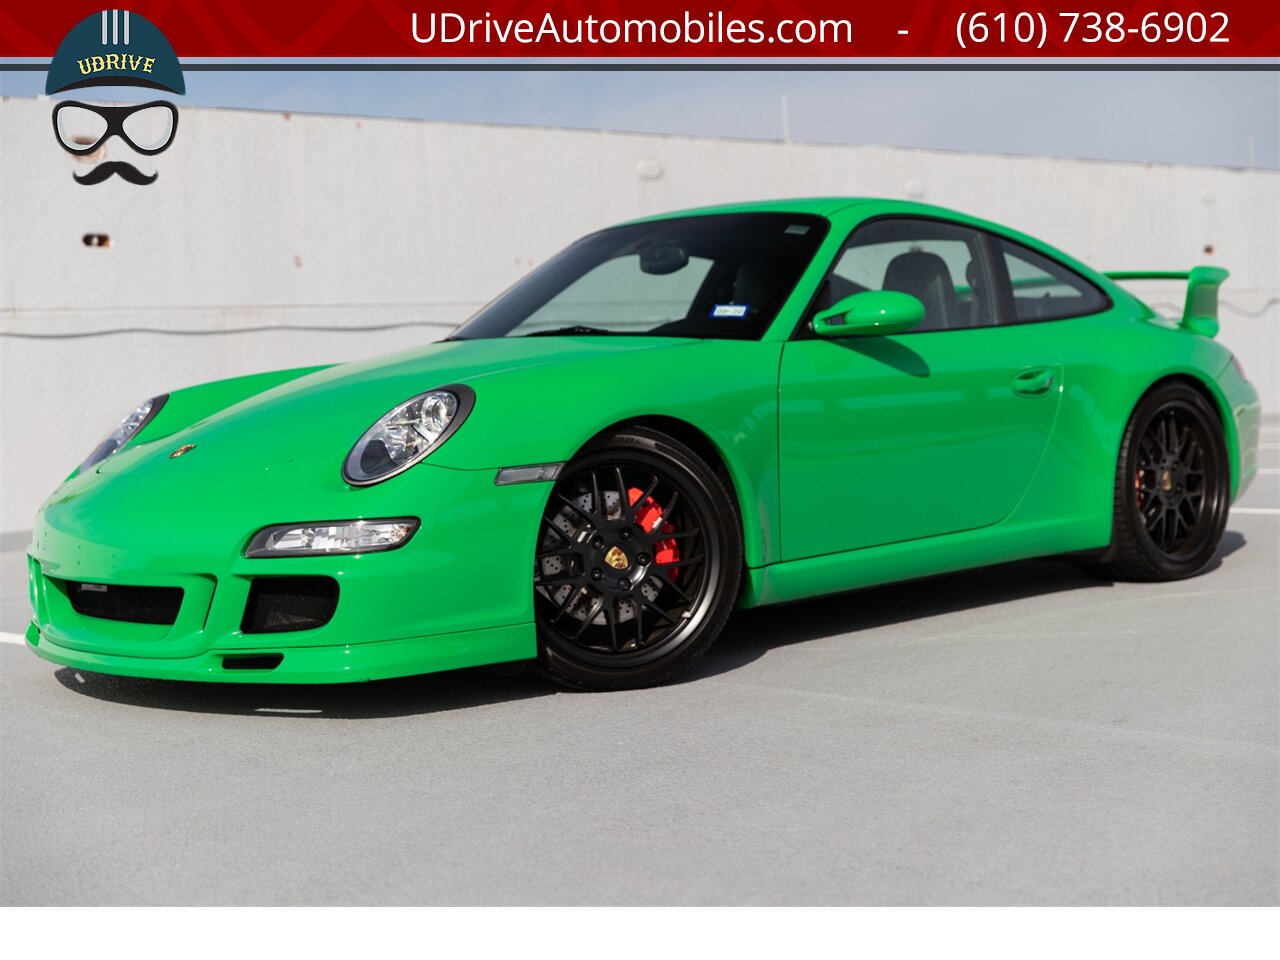 2008 Porsche 911 S 997 6Sp PTS RS Green AeroKit 1of a Kind  $118k MSRP Champion F77 Pkg RG5 Whls - Photo 1 - West Chester, PA 19382